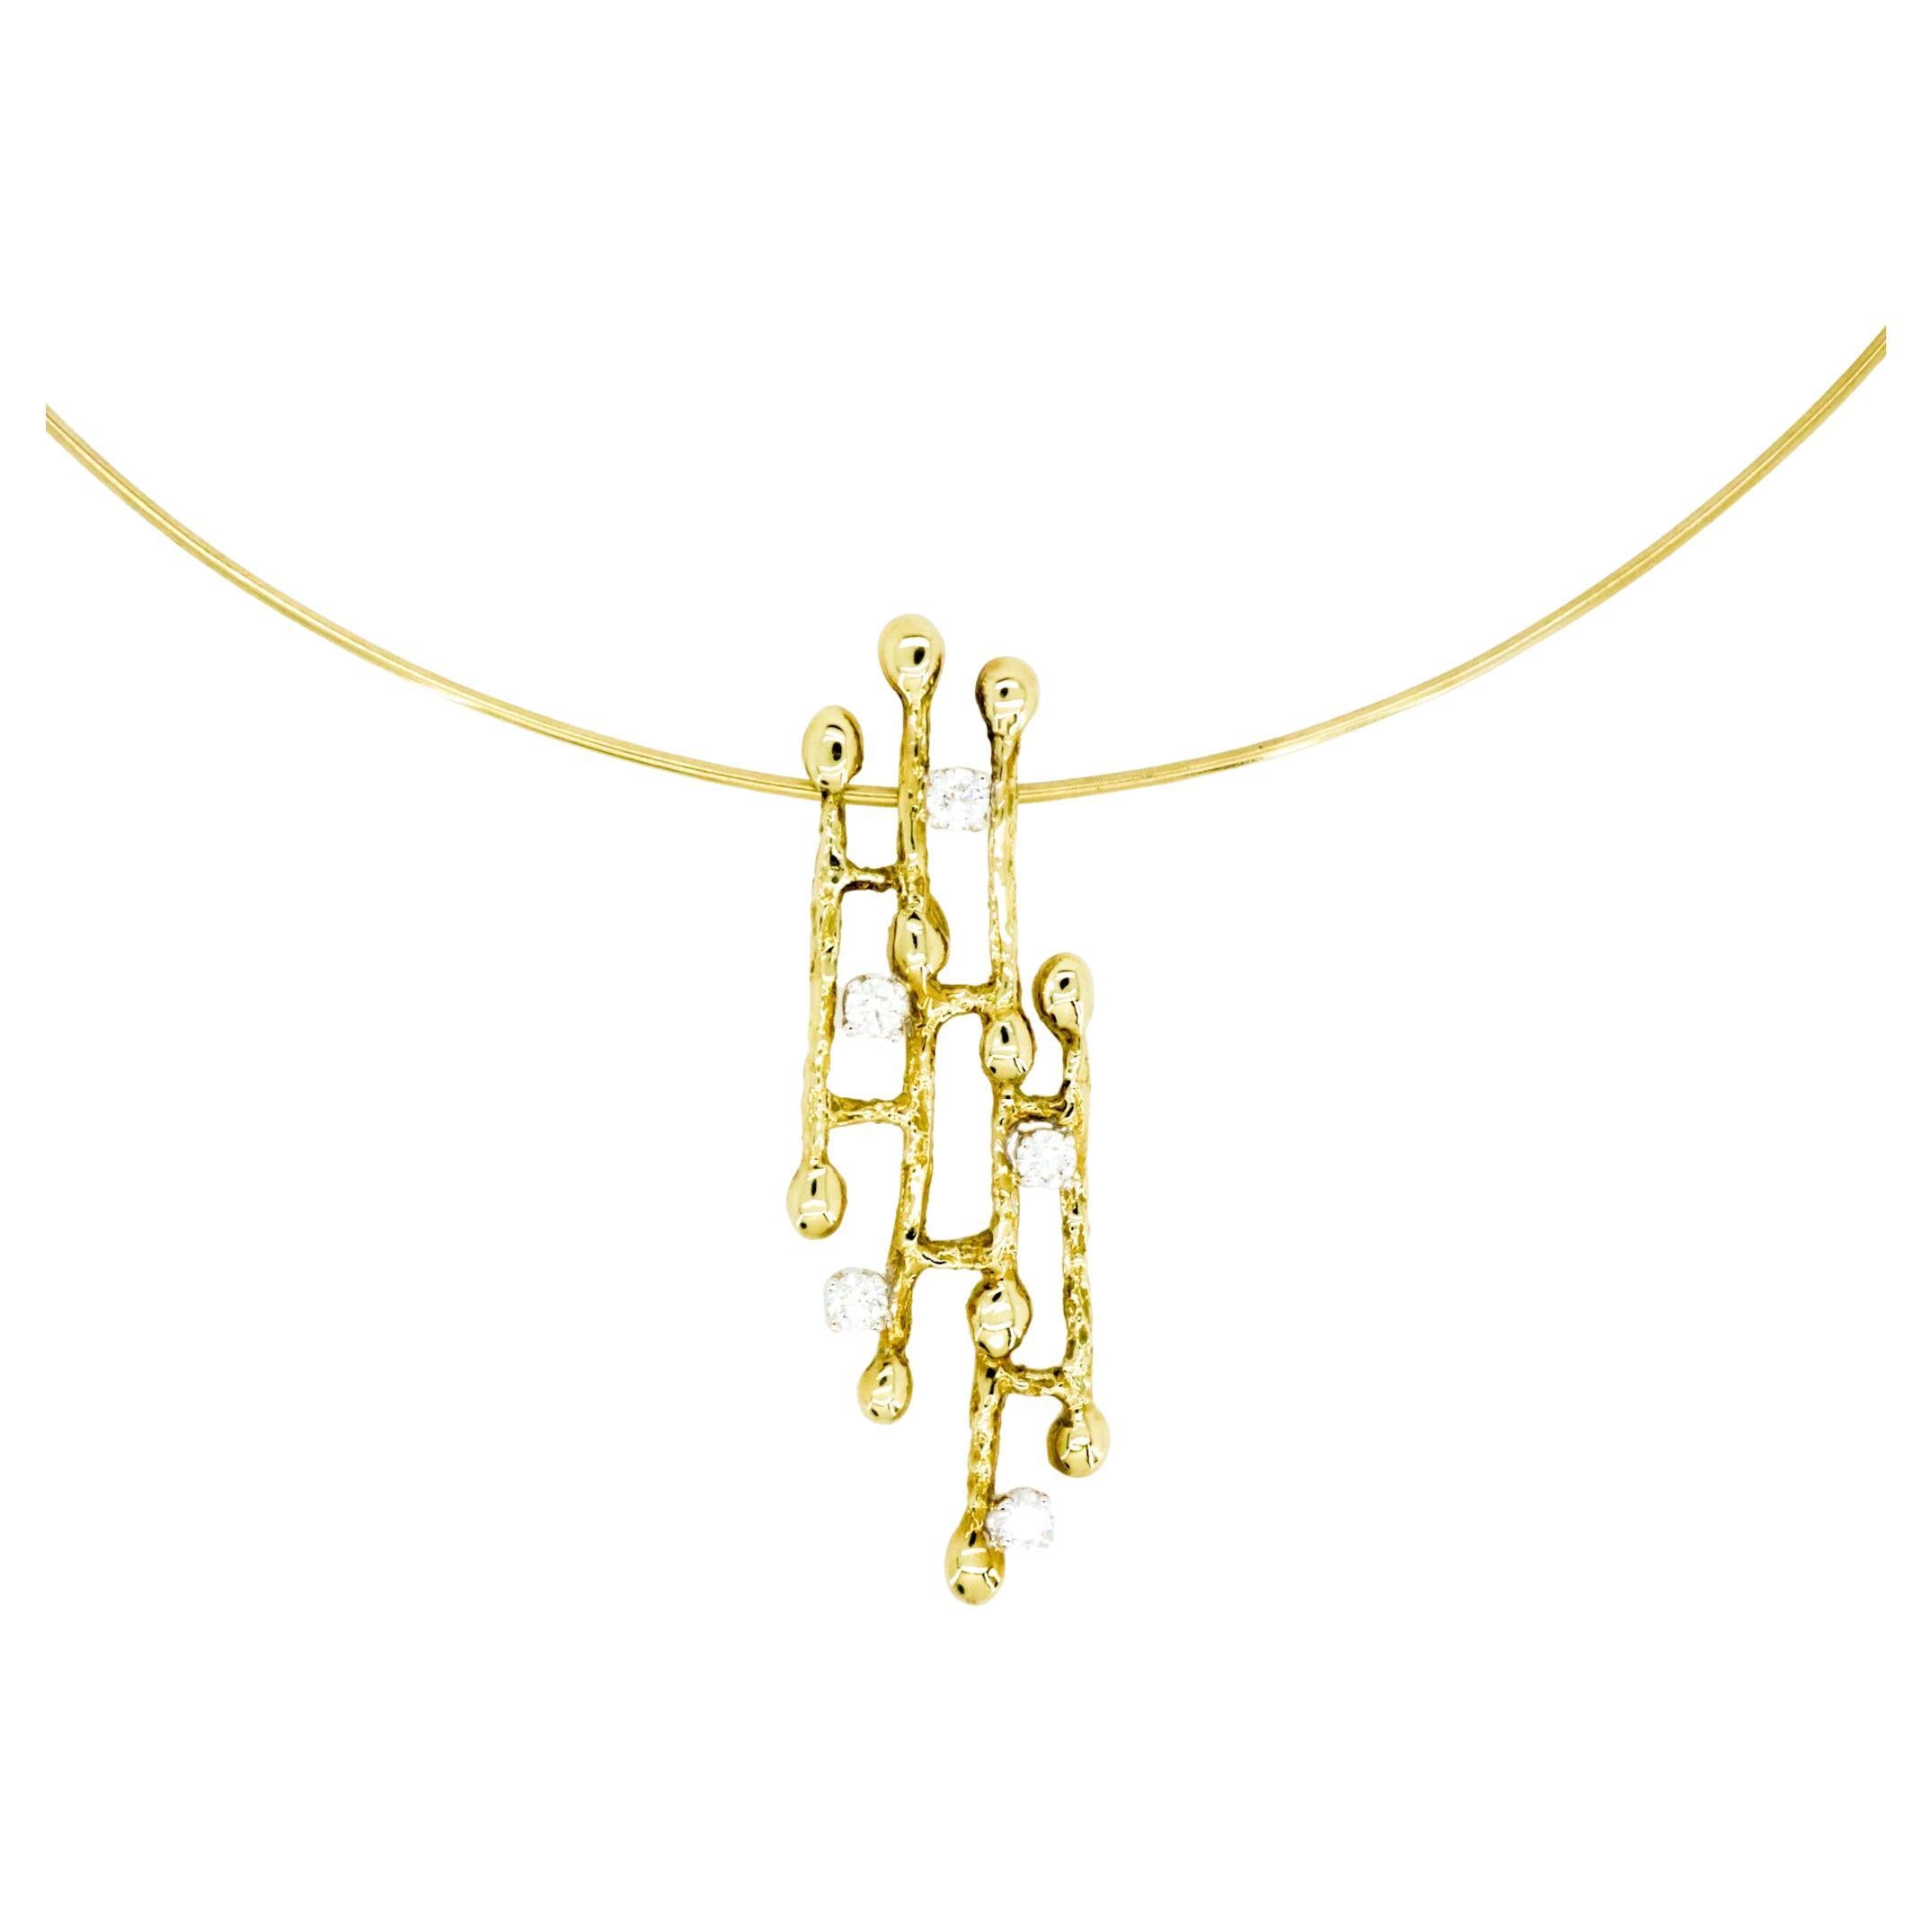 18K Yellow Gold 1.00 Carat Diamonds Grounding Empowerment Made in Italy Necklace.
The Halley Grounding Pendant Necklace was Inspired by Celestial Beauty and Energized by Earth.
The Halley grounding pendant necklace is made of 18 karat yellow gold